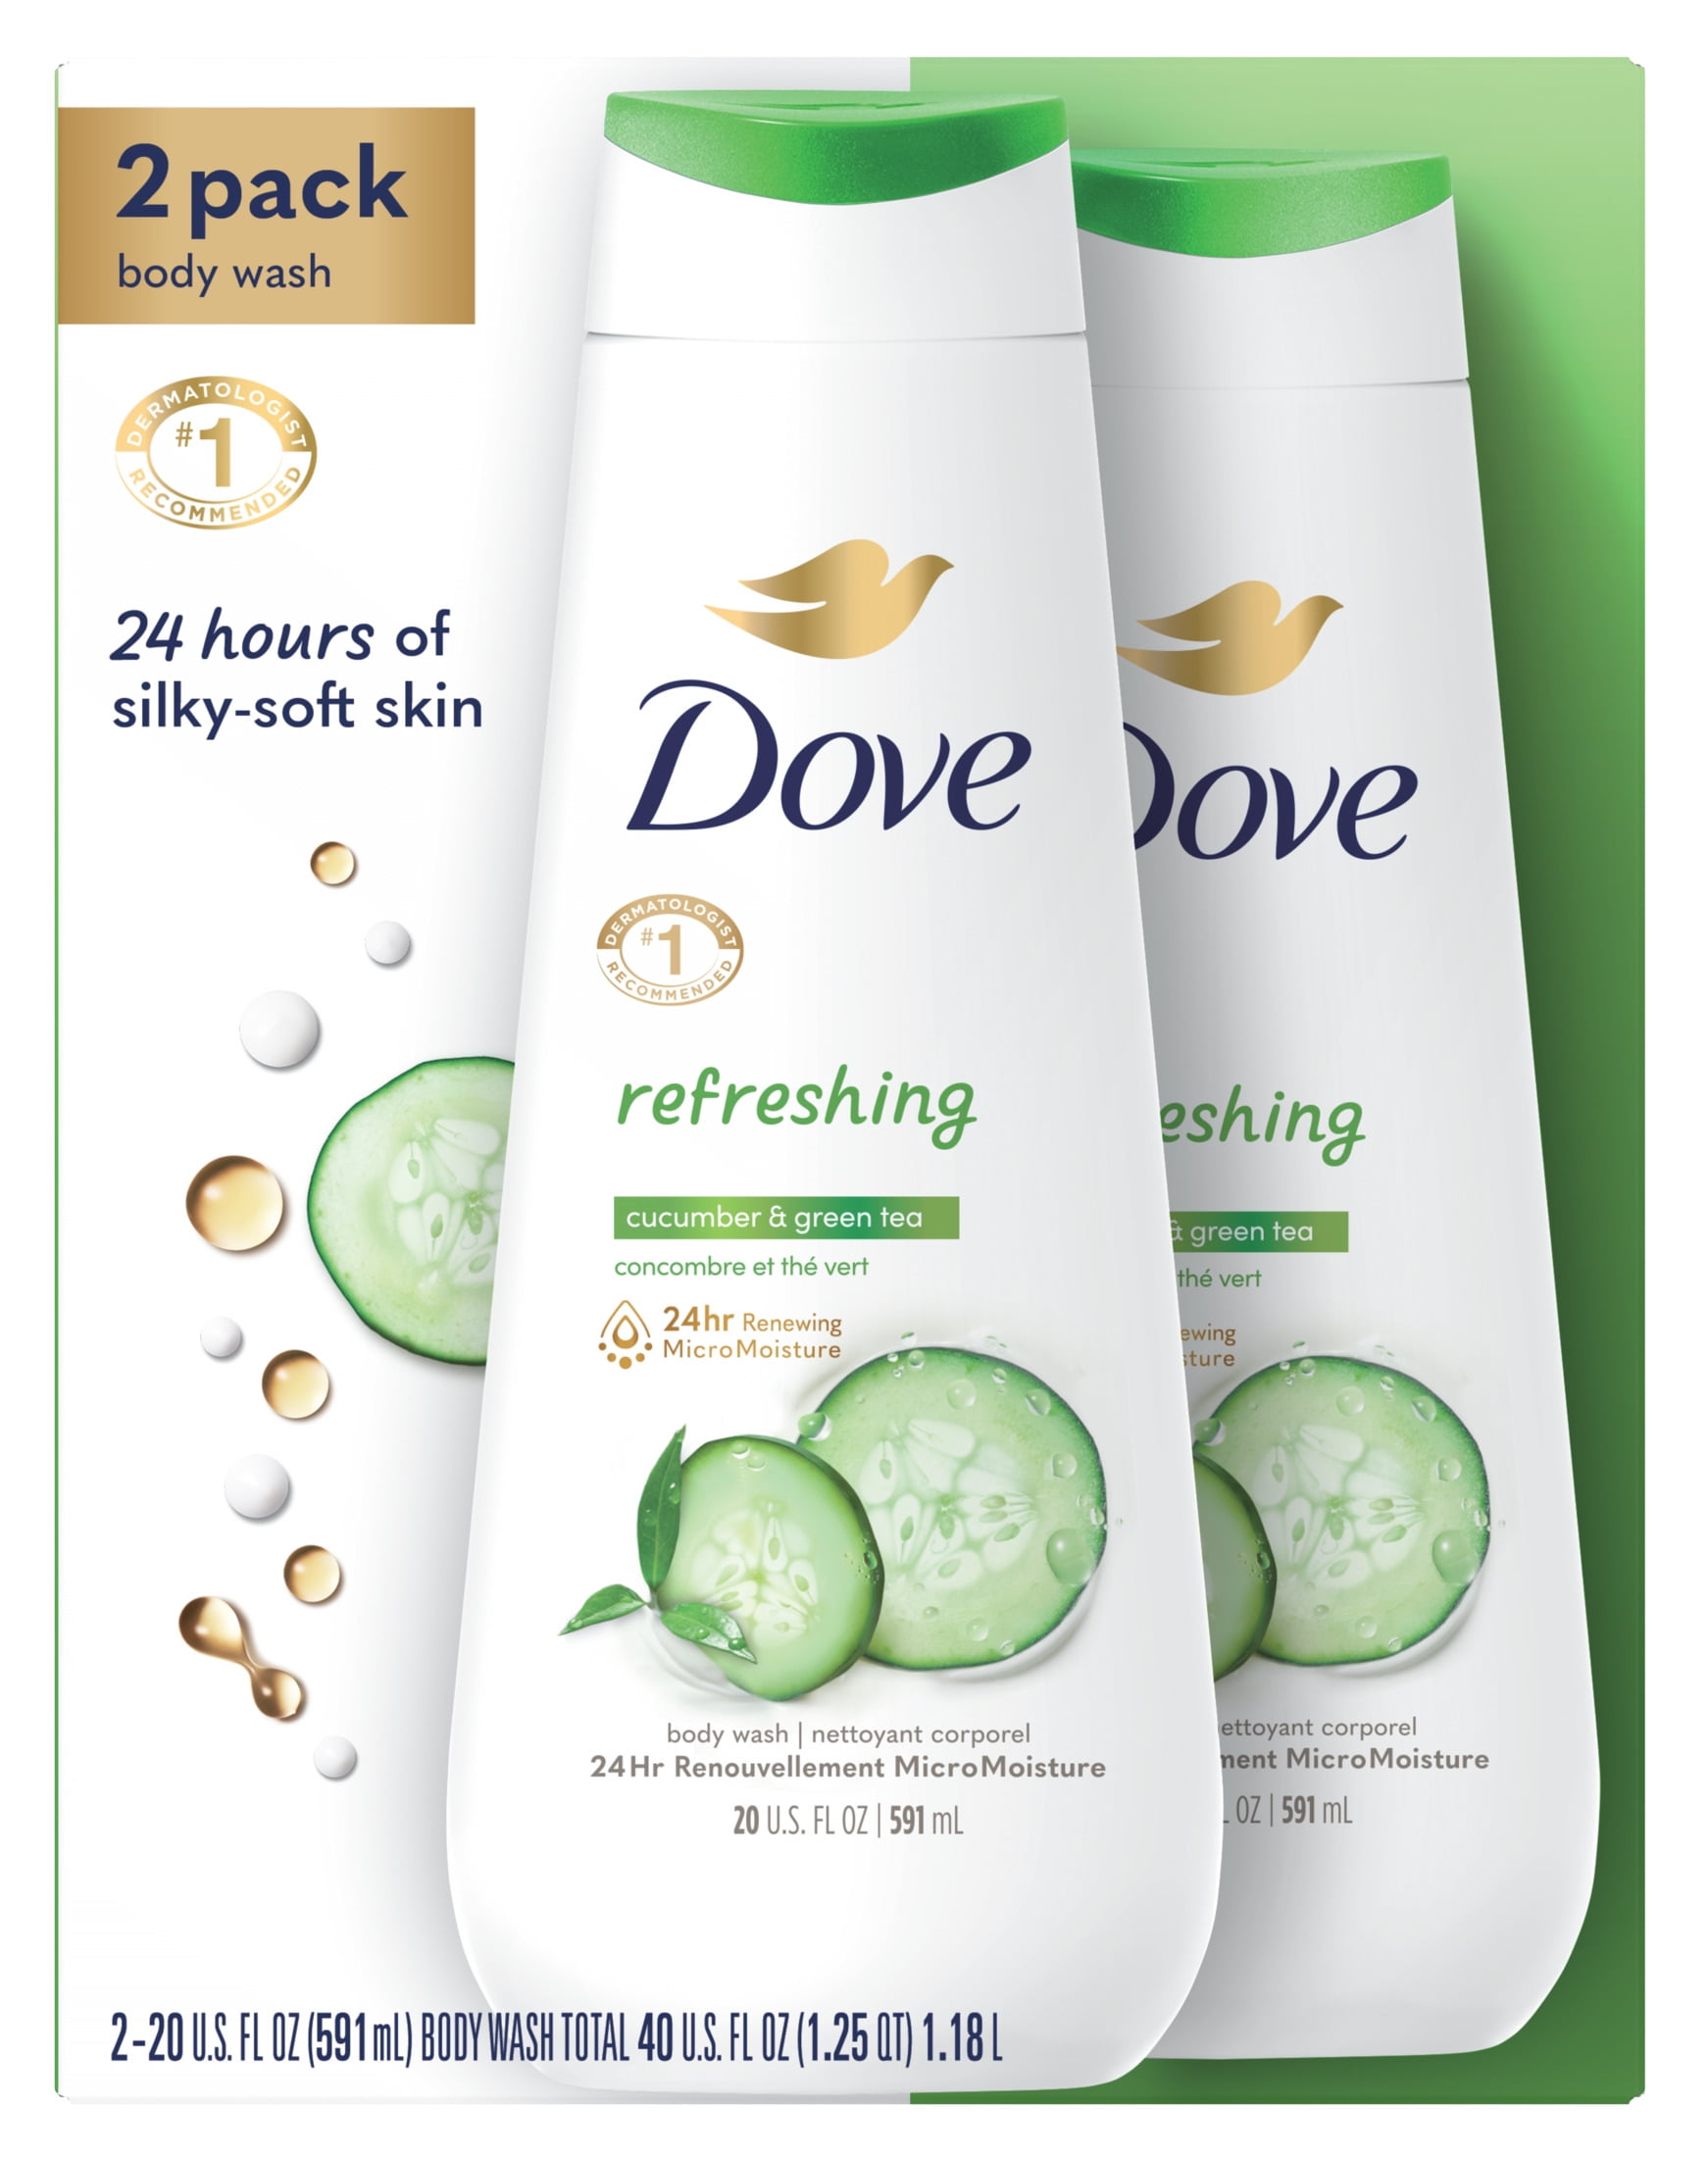 Dove Refreshing Liquid Body Wash Cucumber and Green Tea Cleanser, 20 oz, 2 Count